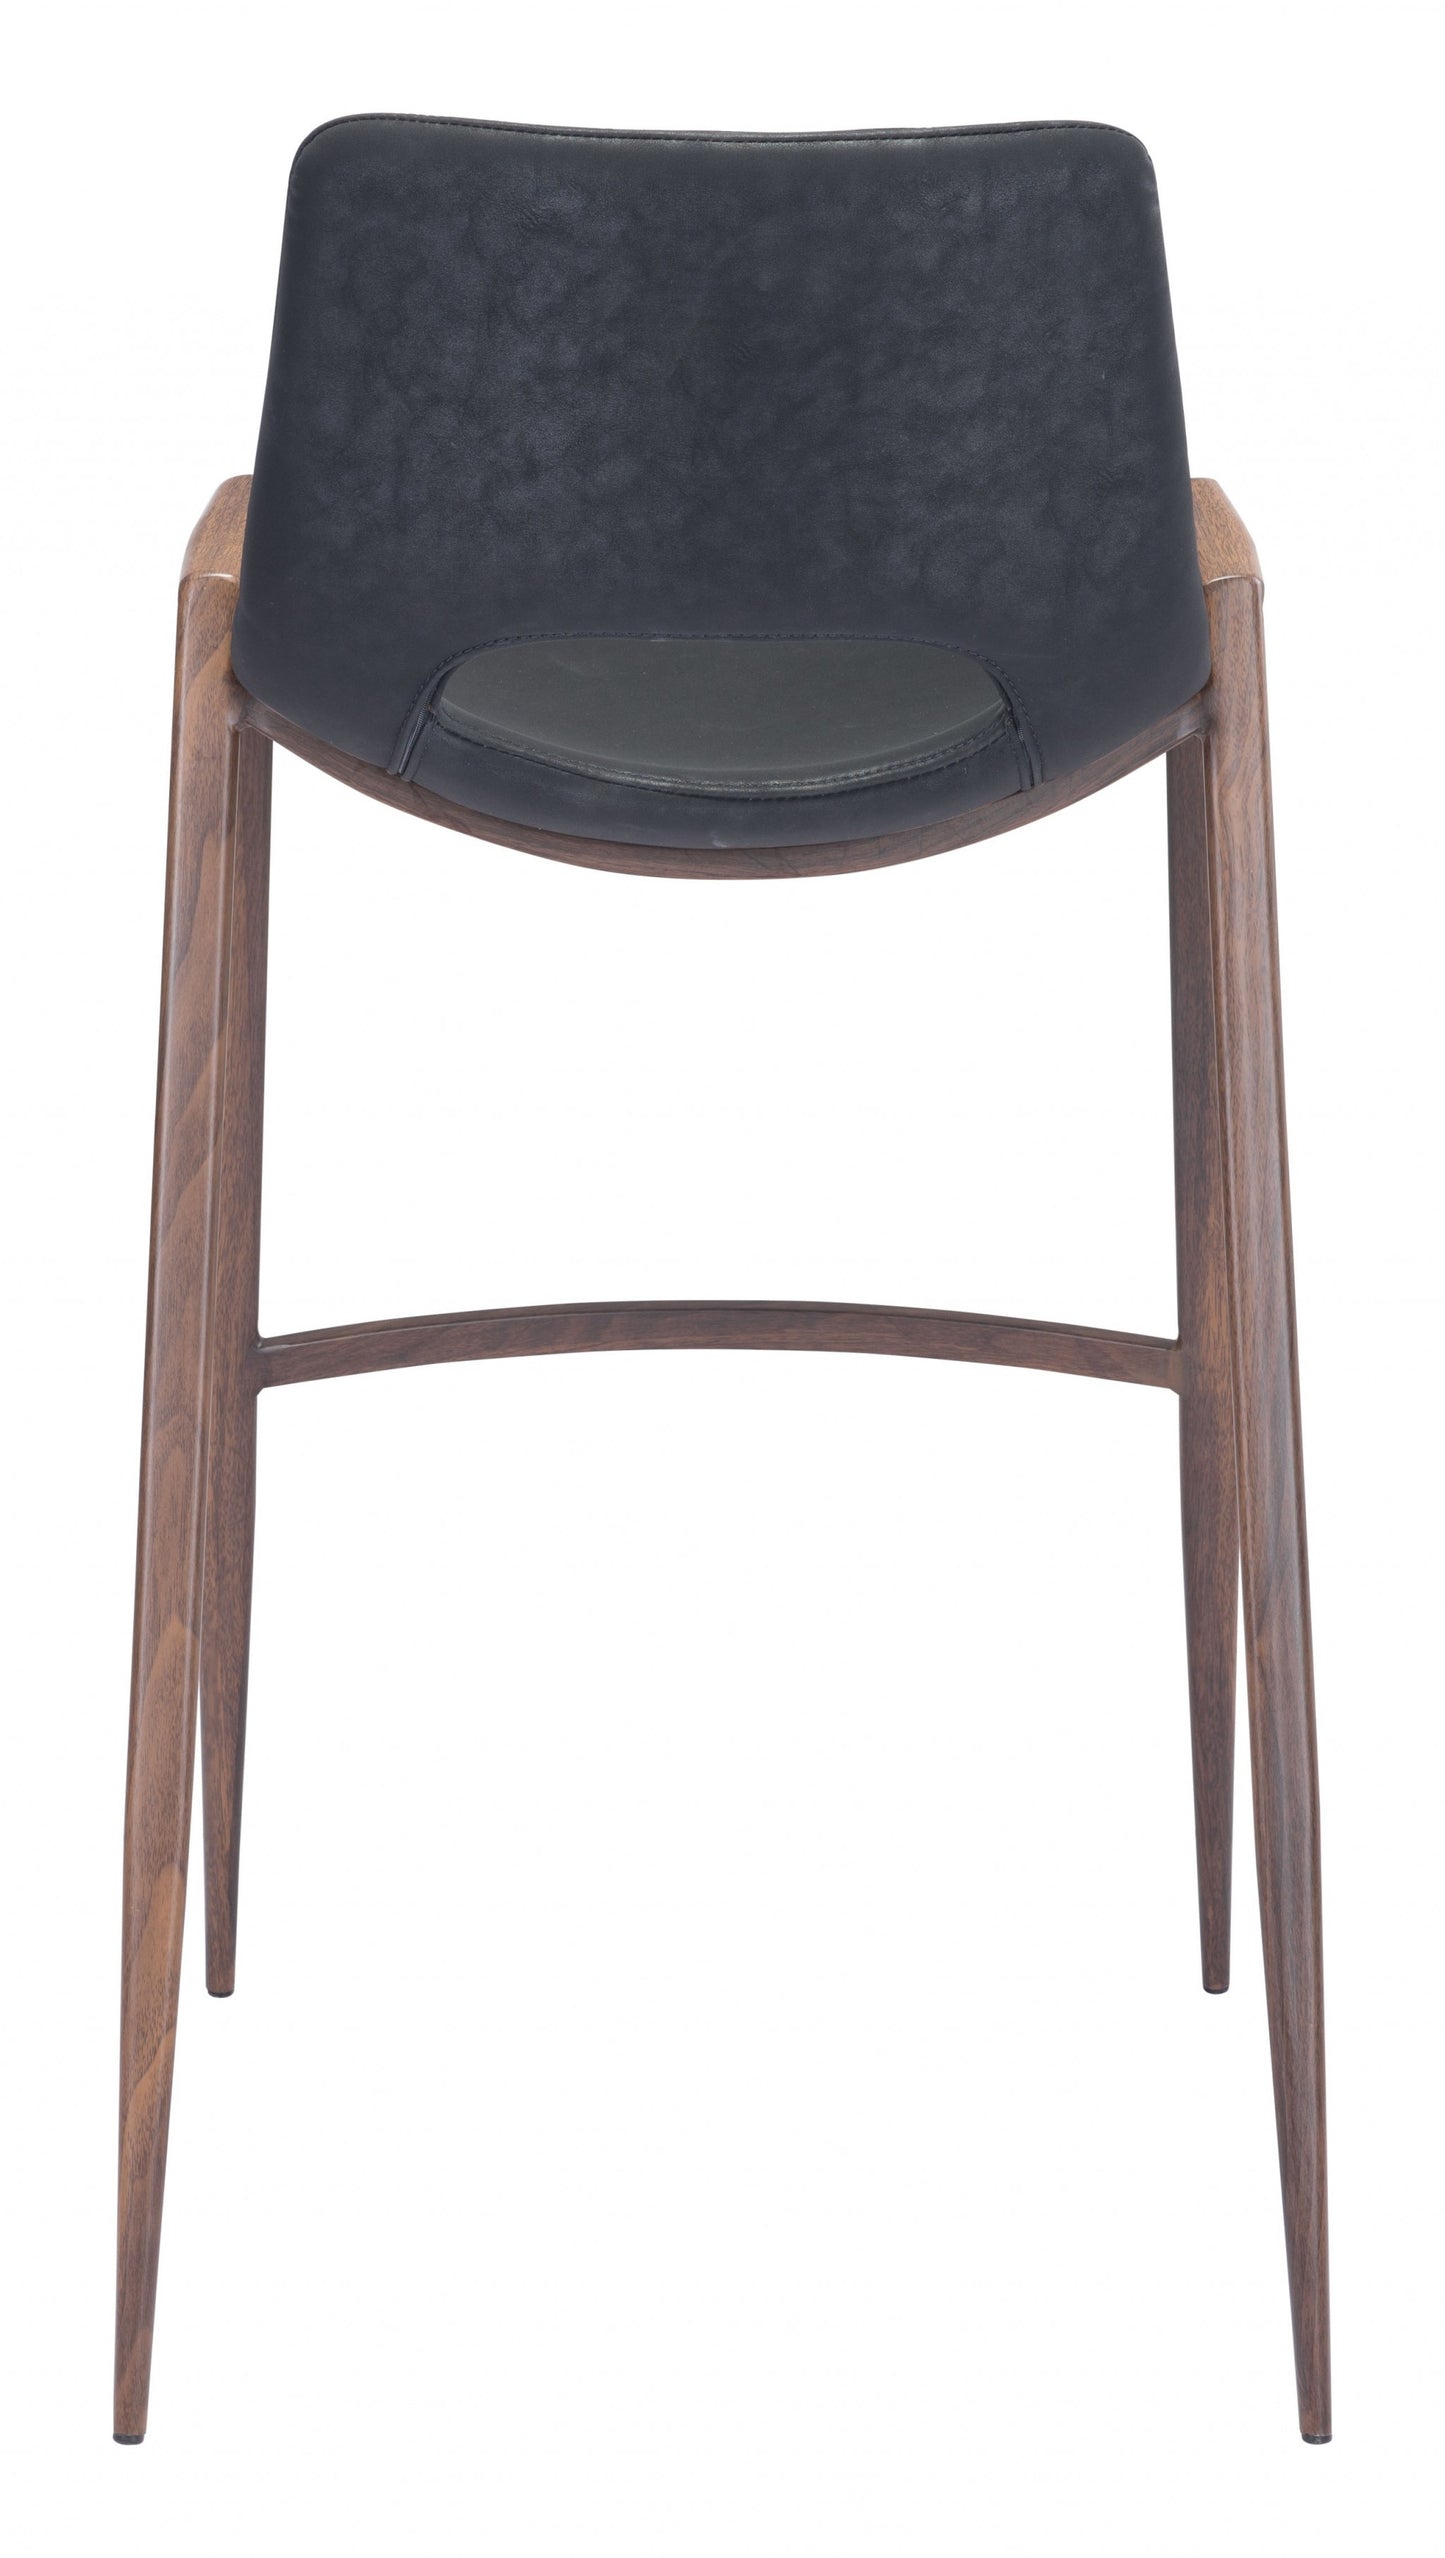 Set Of Two 39" Black And Brown Steel Low Back Bar Height Chairs With Footrest By Homeroots